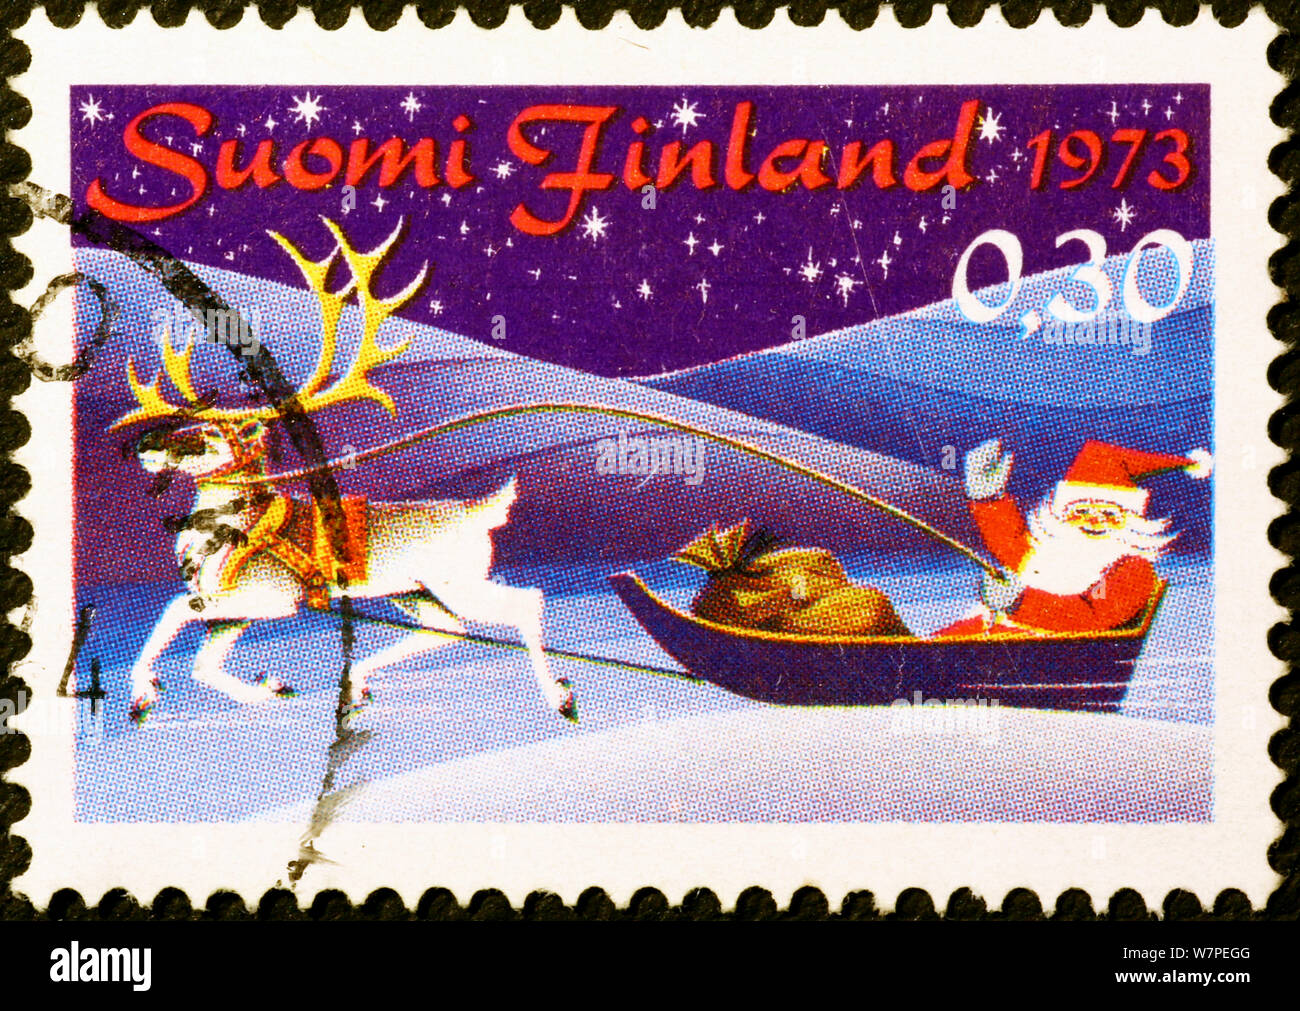 Santa Claus on his sleigh in finnish postage stamp Stock Photo